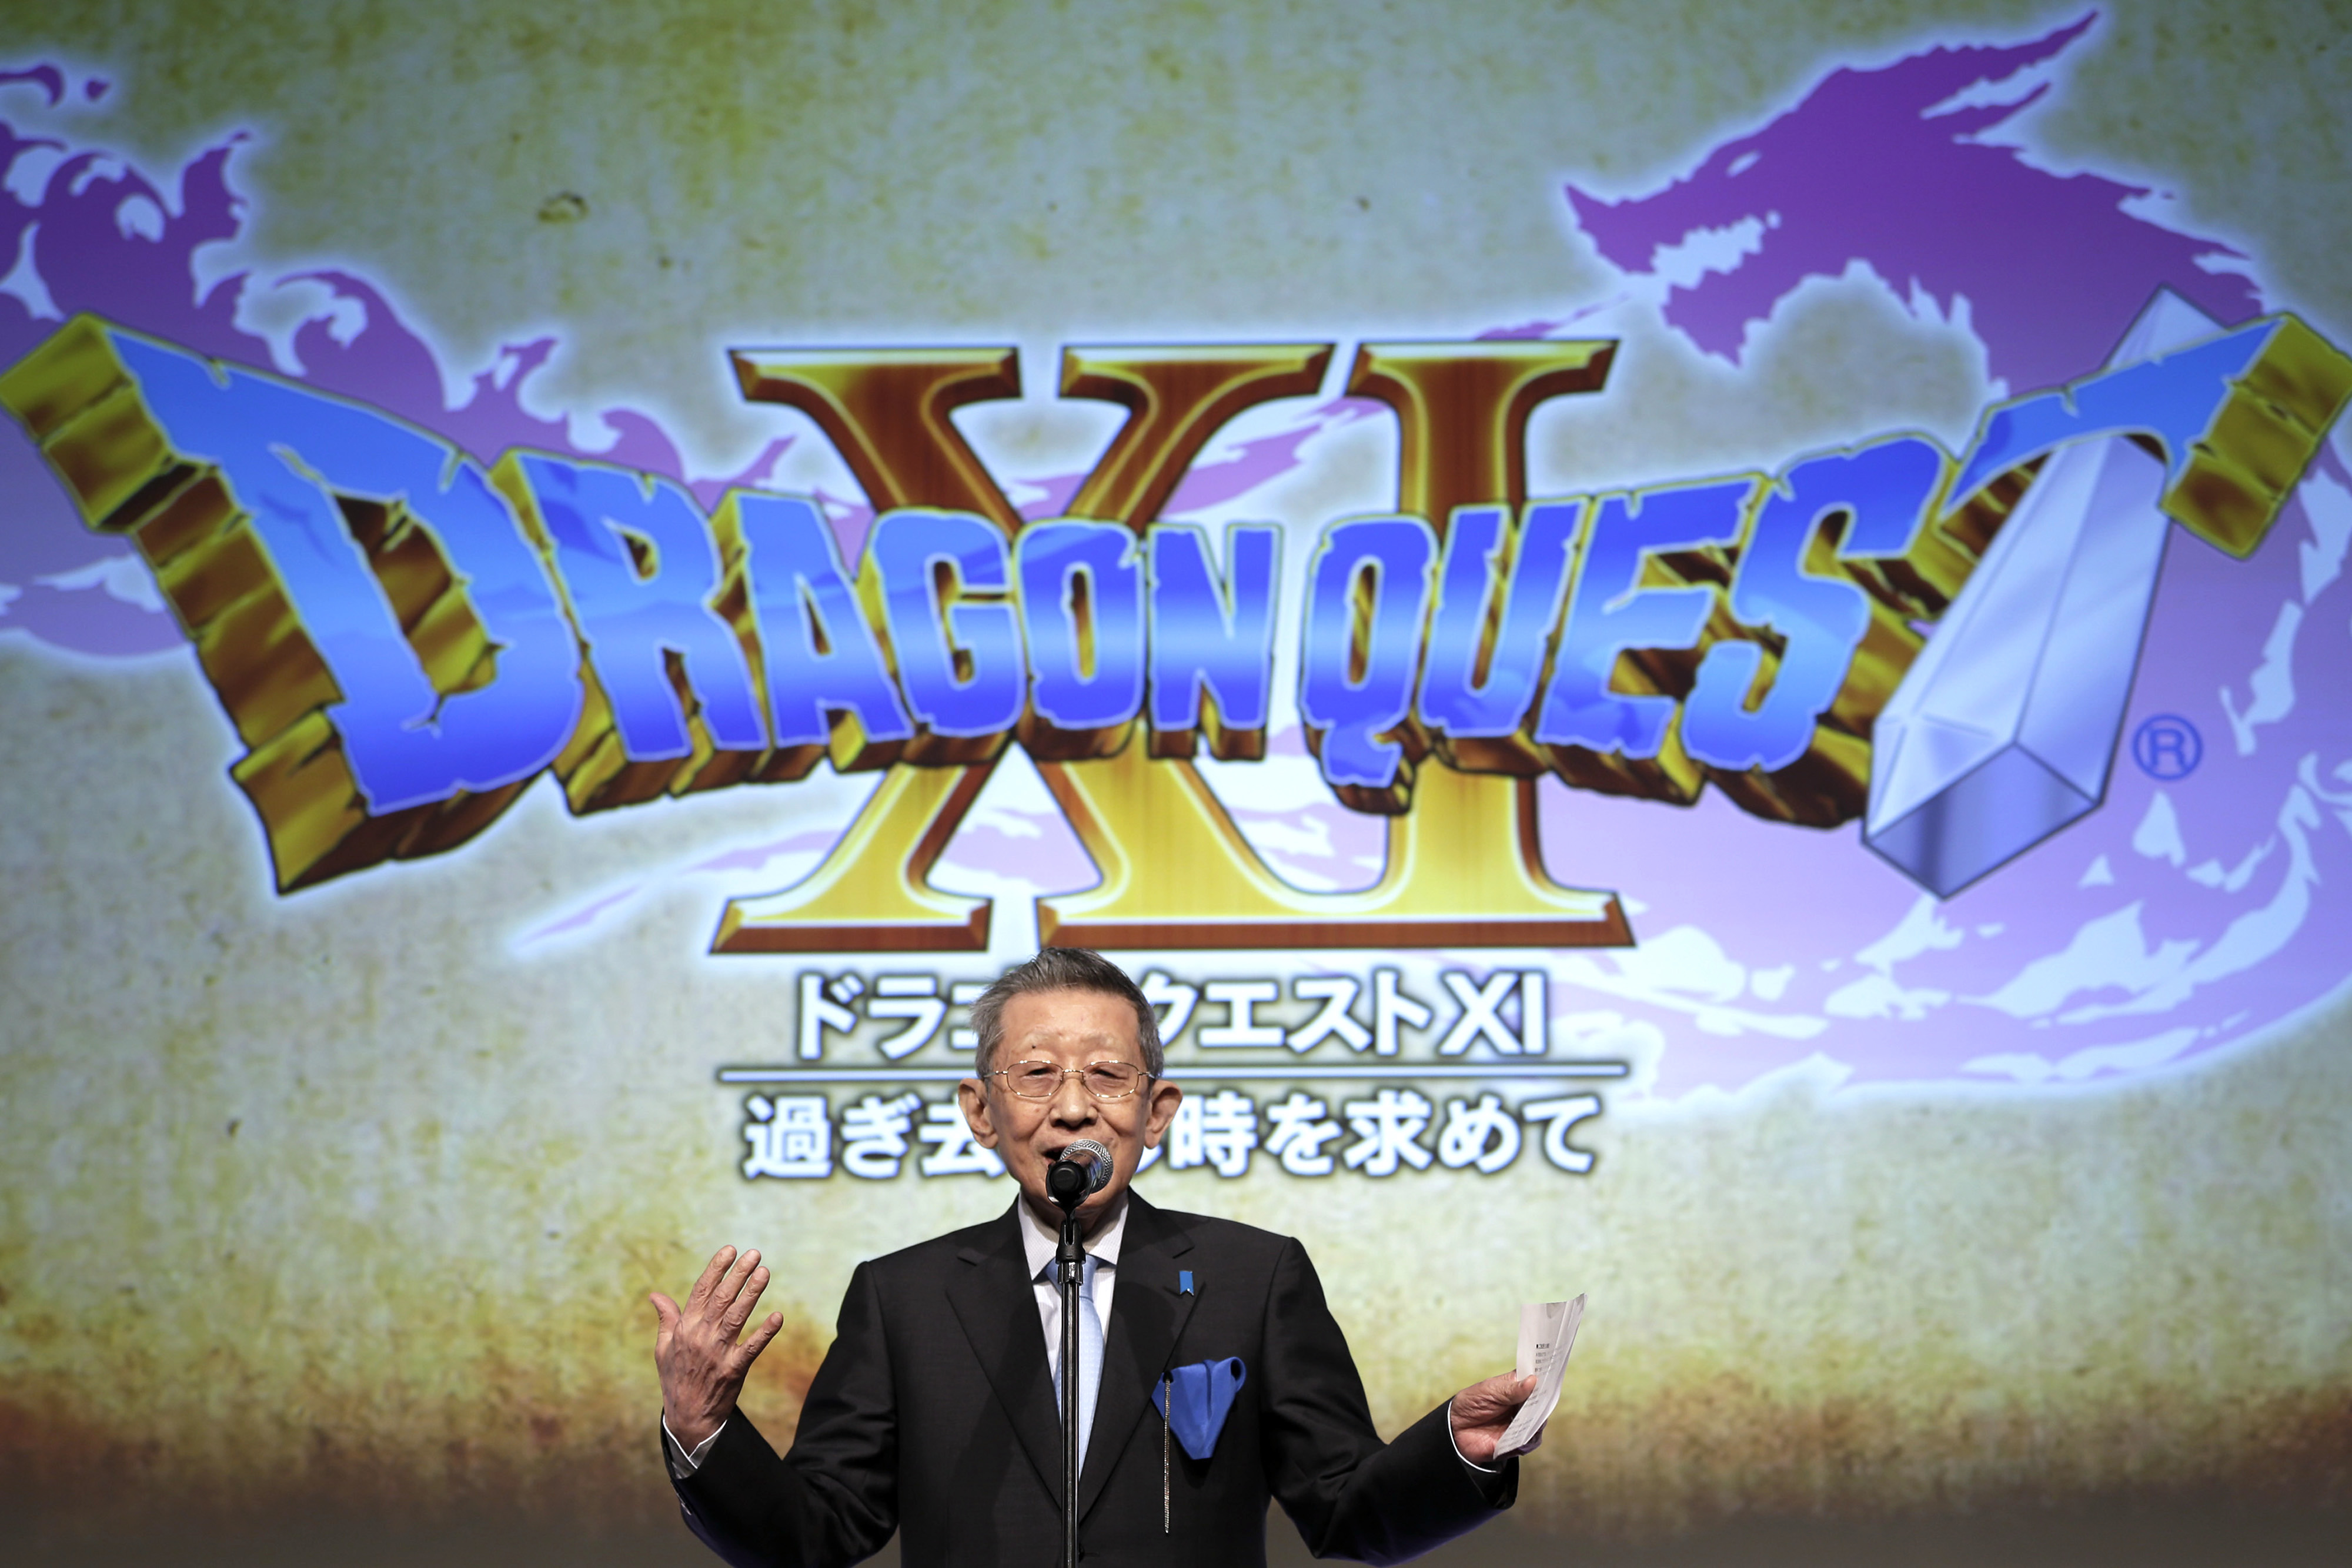 Koichi Sugiyama speaks during the unveiling of Dragon Quest 11 in Tokyo, Japan in 2015